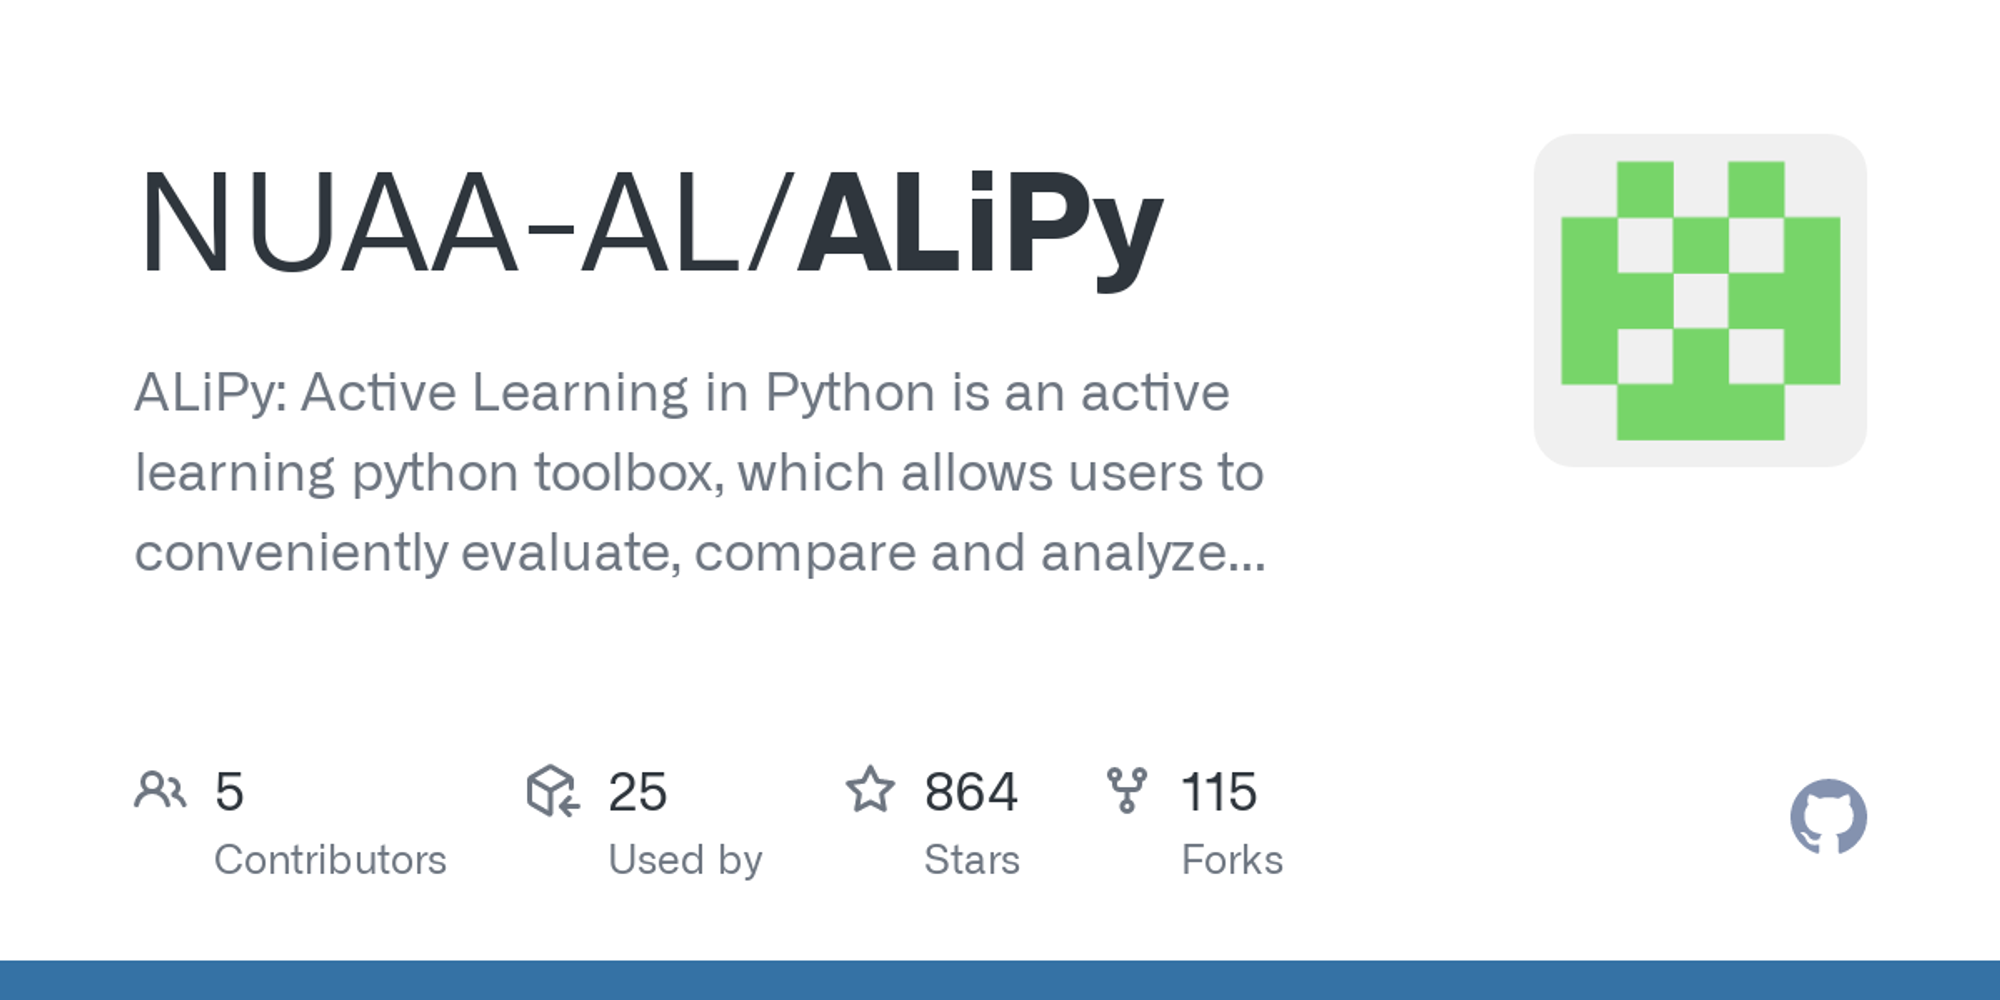 GitHub - NUAA-AL/ALiPy: ALiPy: Active Learning in Python is an active learning python toolbox, which allows users to conveniently evaluate, compare and analyze the performance of active learning methods.